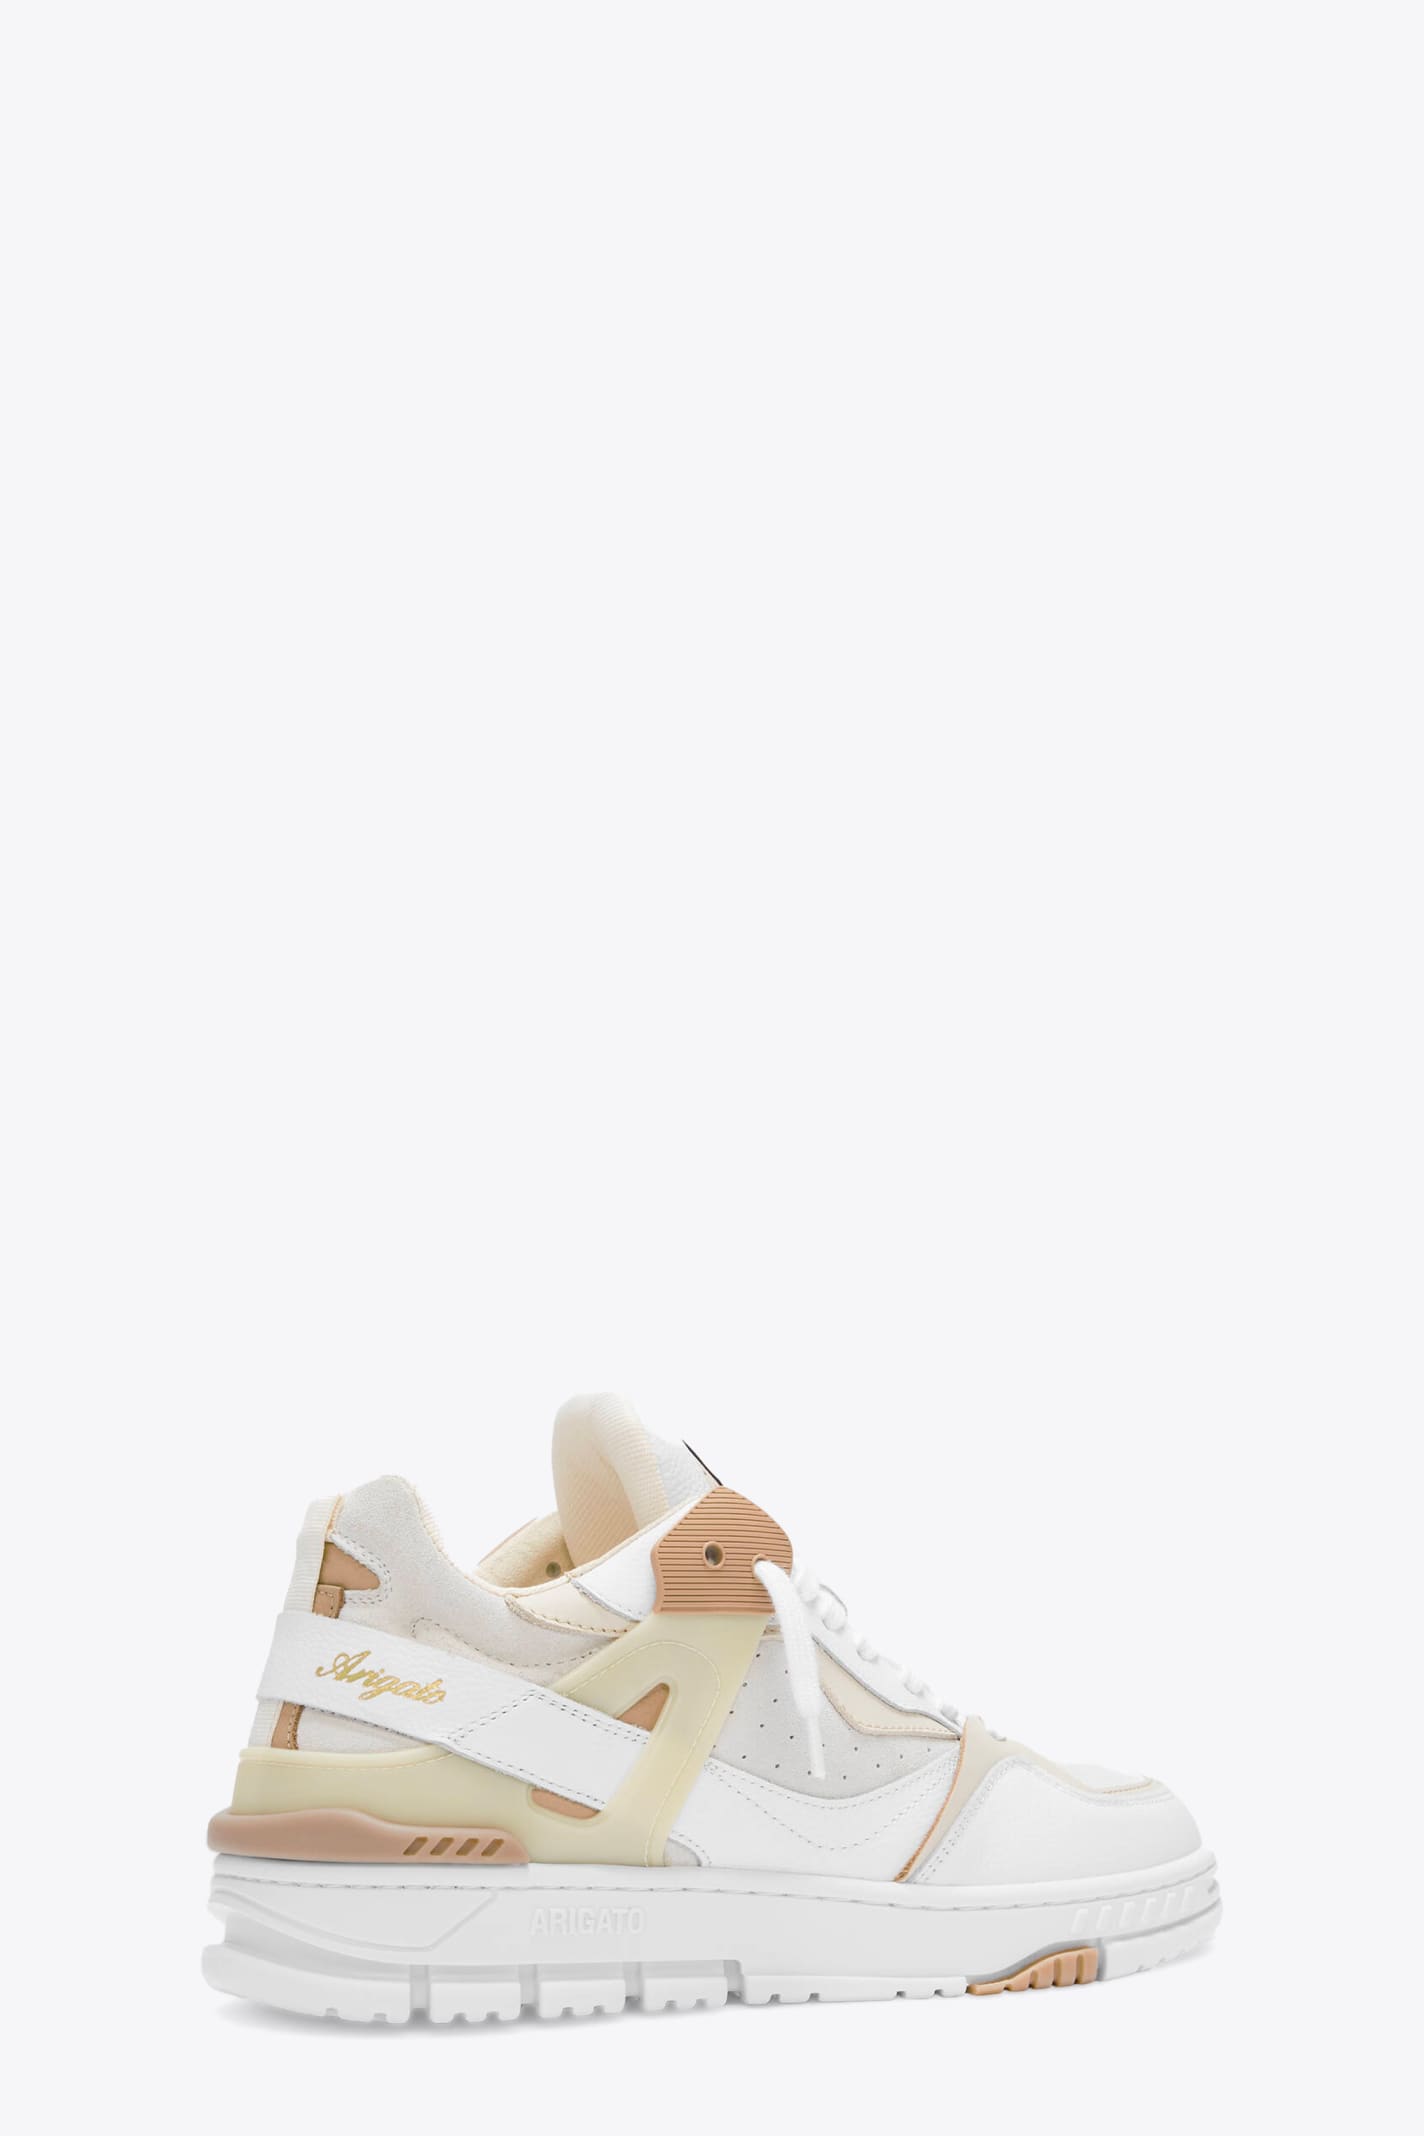 Shop Axel Arigato Astro Sneaker White And Beige Leather 90s Style Low Sneaker - Astro Sneaker In Bianco/beige